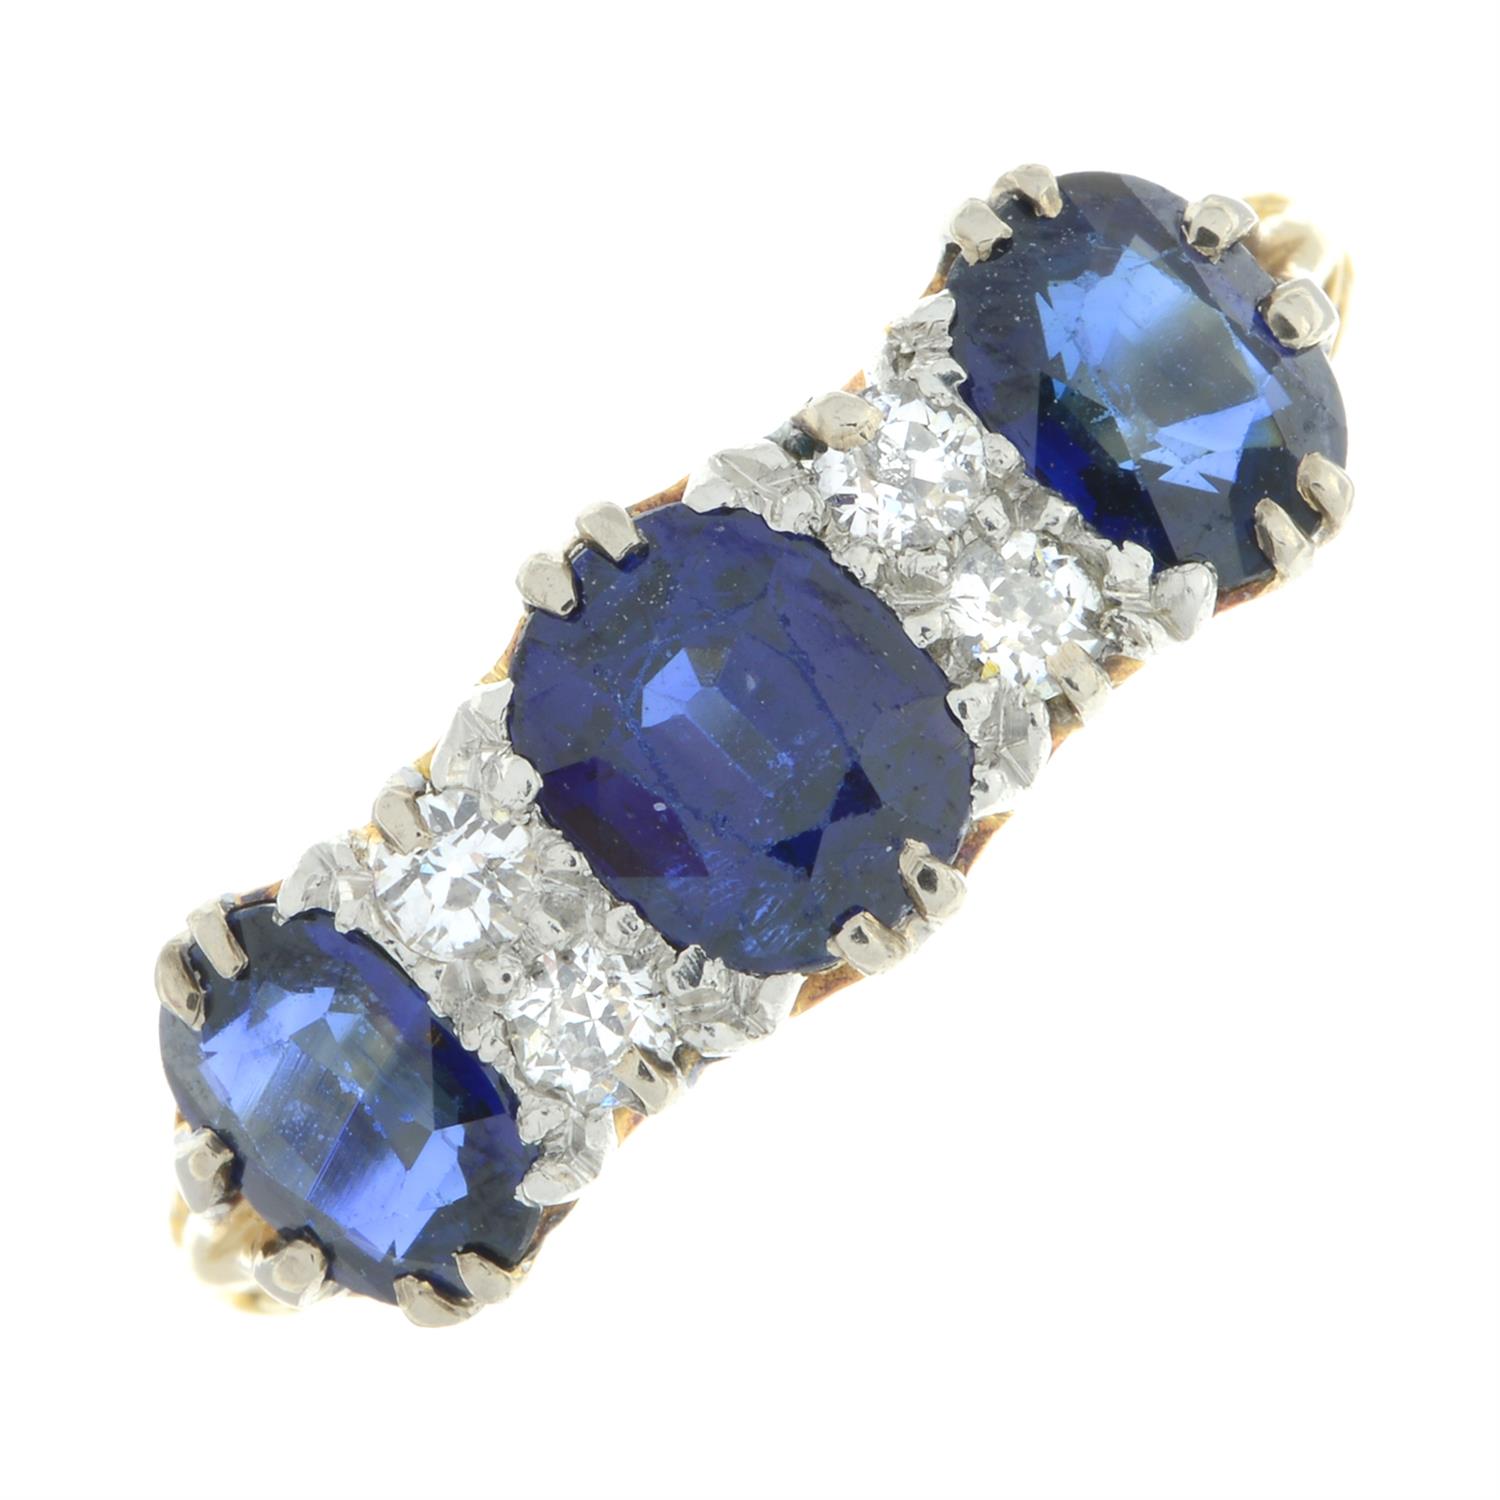 Early 20th century 18ct gold sapphire and diamond ring - Image 2 of 5